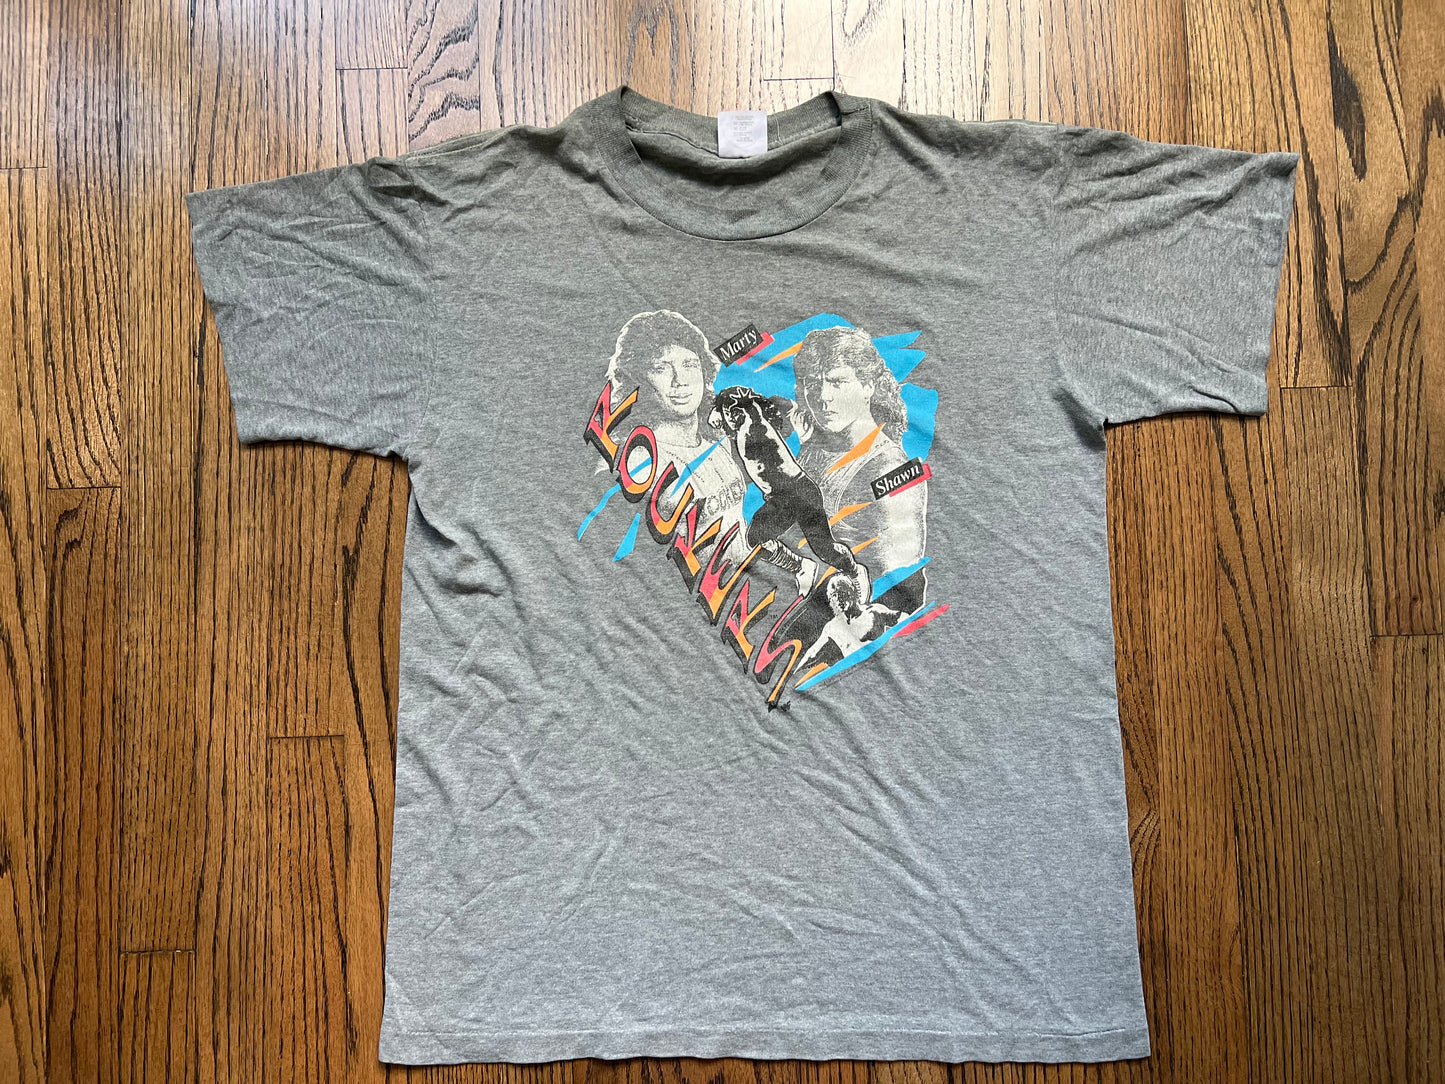 1990 WWF Rockers shirt featuring Shawn Michaels and Marty Jannetty